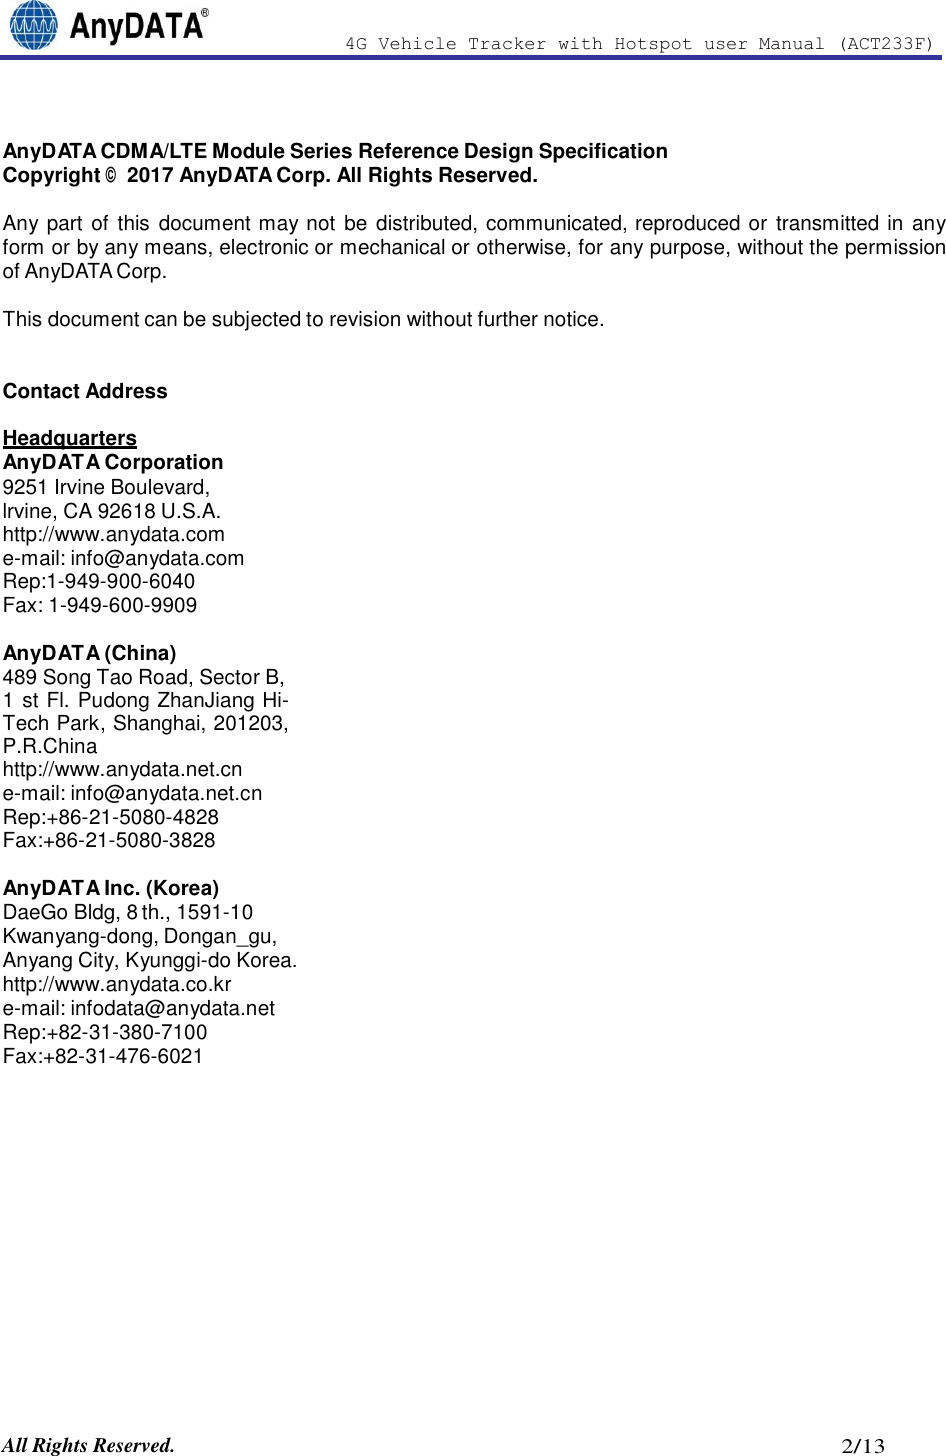 Page 2 of AnyDATA ACT233F 4G Vehicle Tracker with Hotspot User Manual 